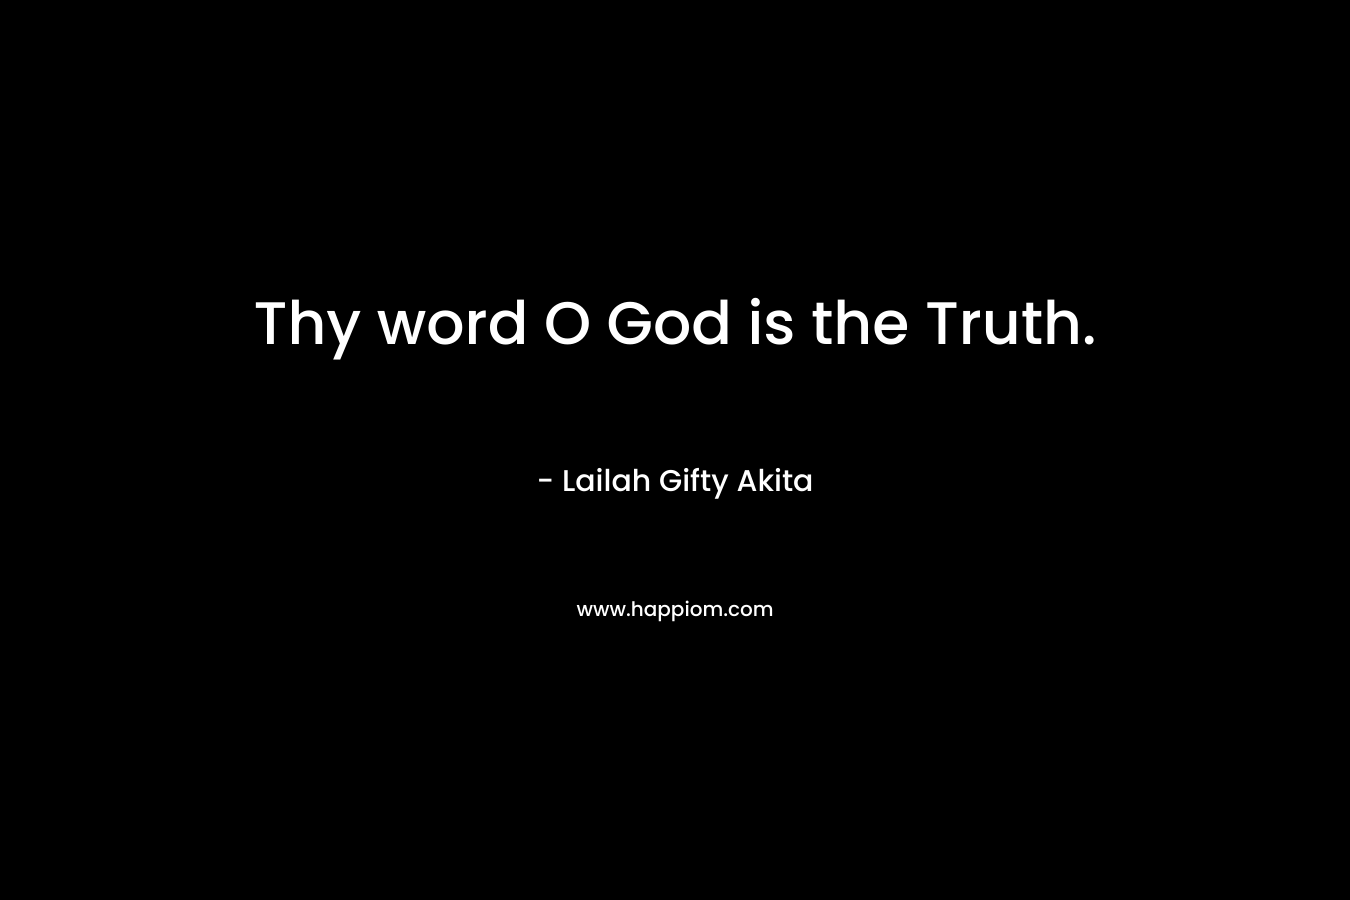 Thy word O God is the Truth.